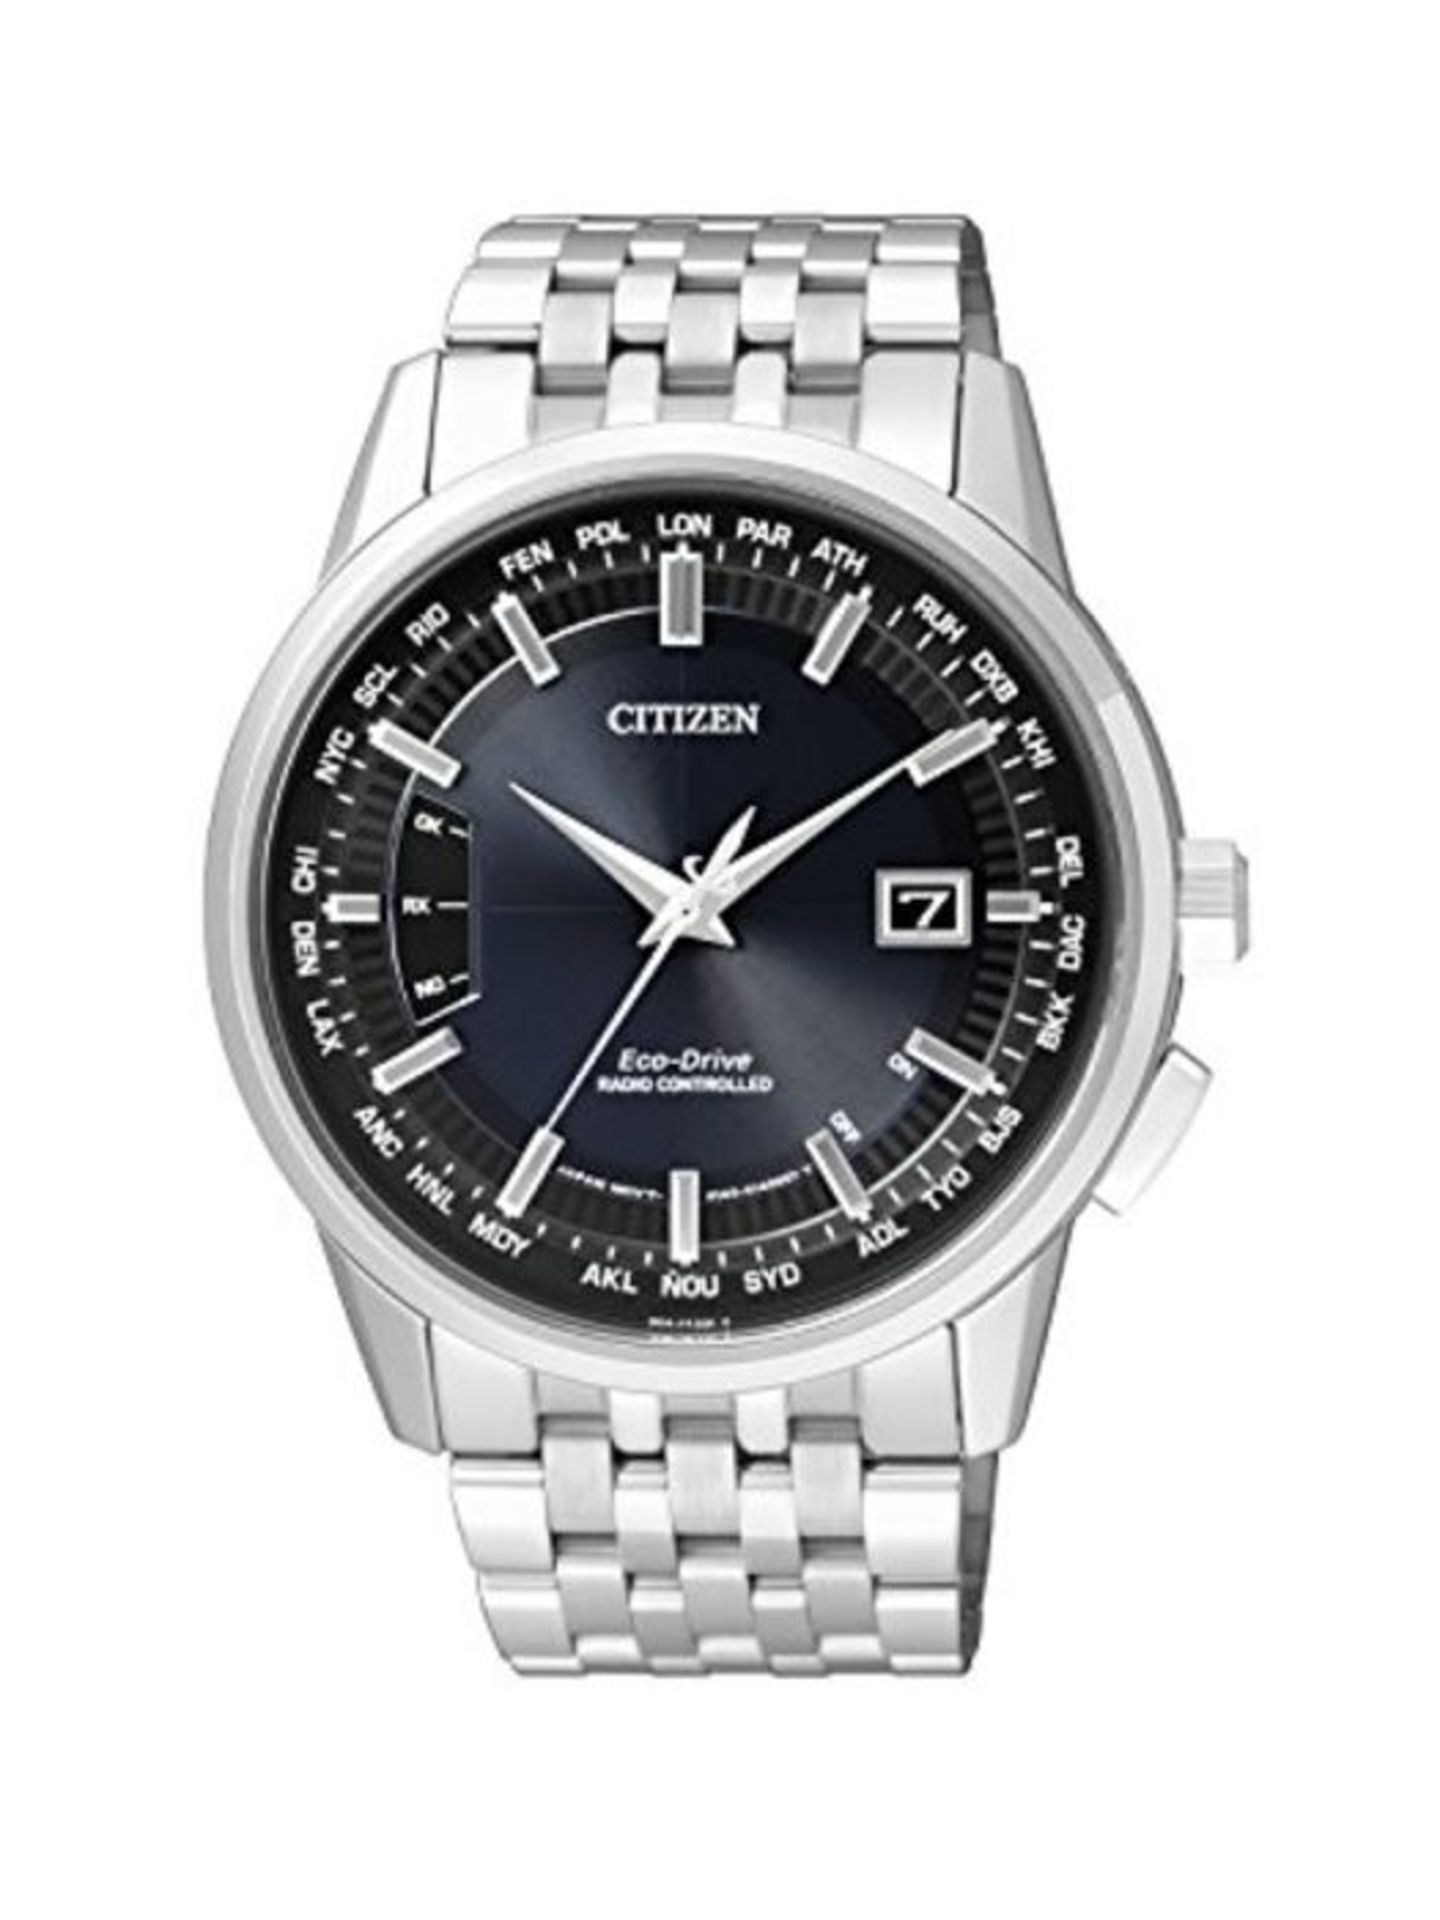 RRP £299.00 Citizen Men's Analogue Quartz Watch with Stainless Steel Strap CB0150-62L